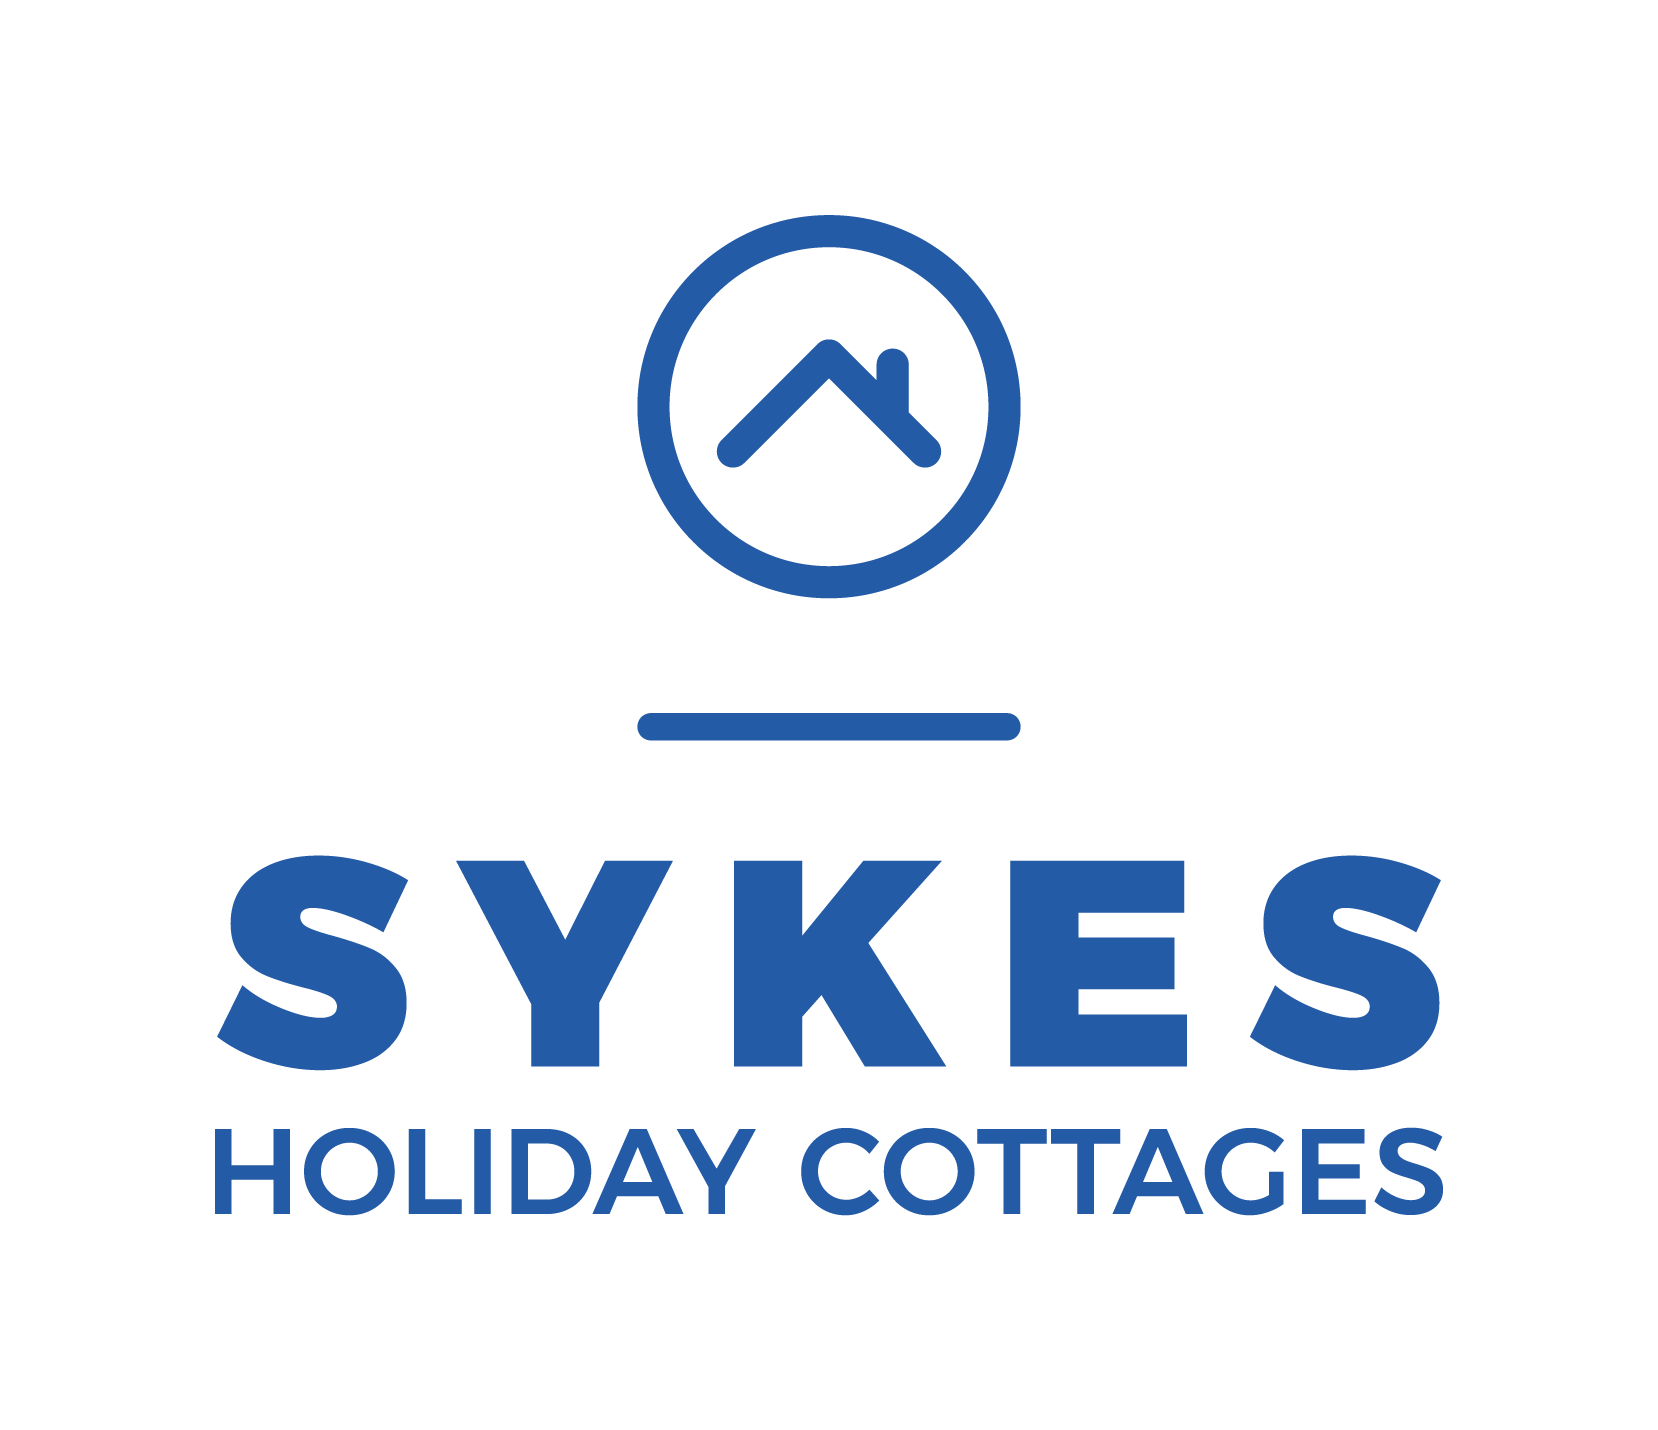 WIN a Christmas Eve box: A Sykes Holiday Cottages Special